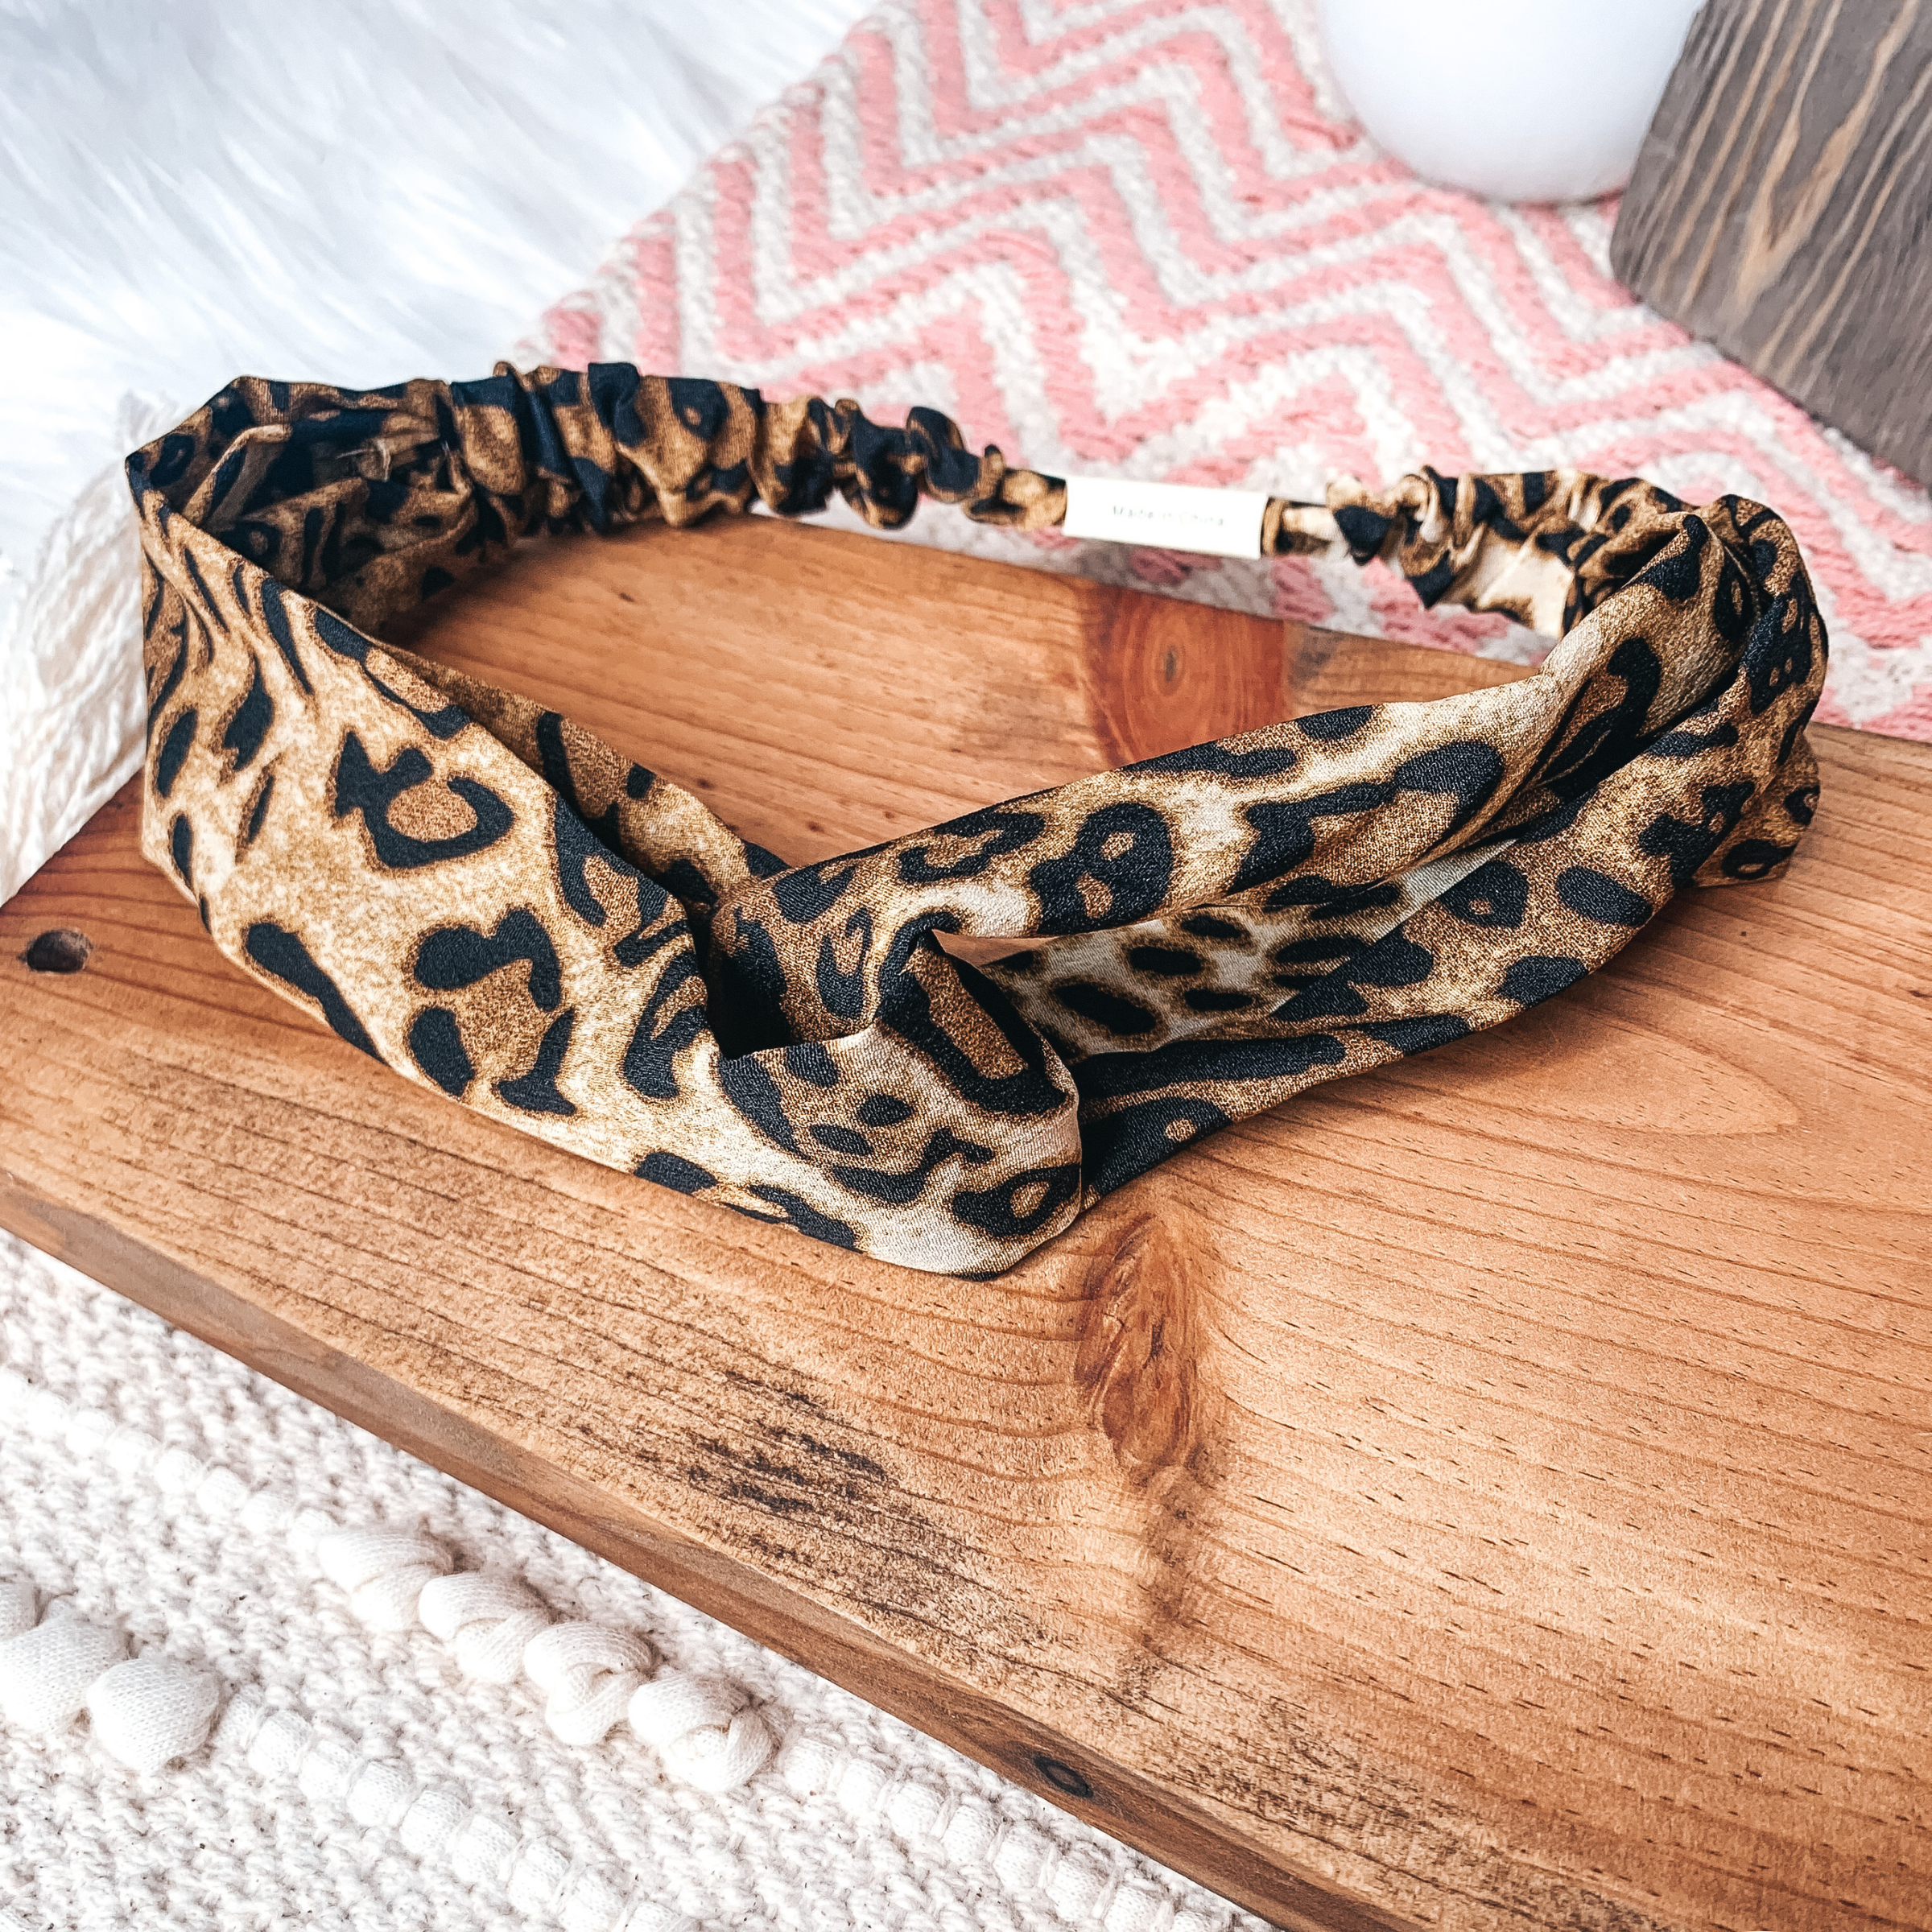 Buy 3 for $10 | Elastic Animal Print Headbands - Giddy Up Glamour Boutique